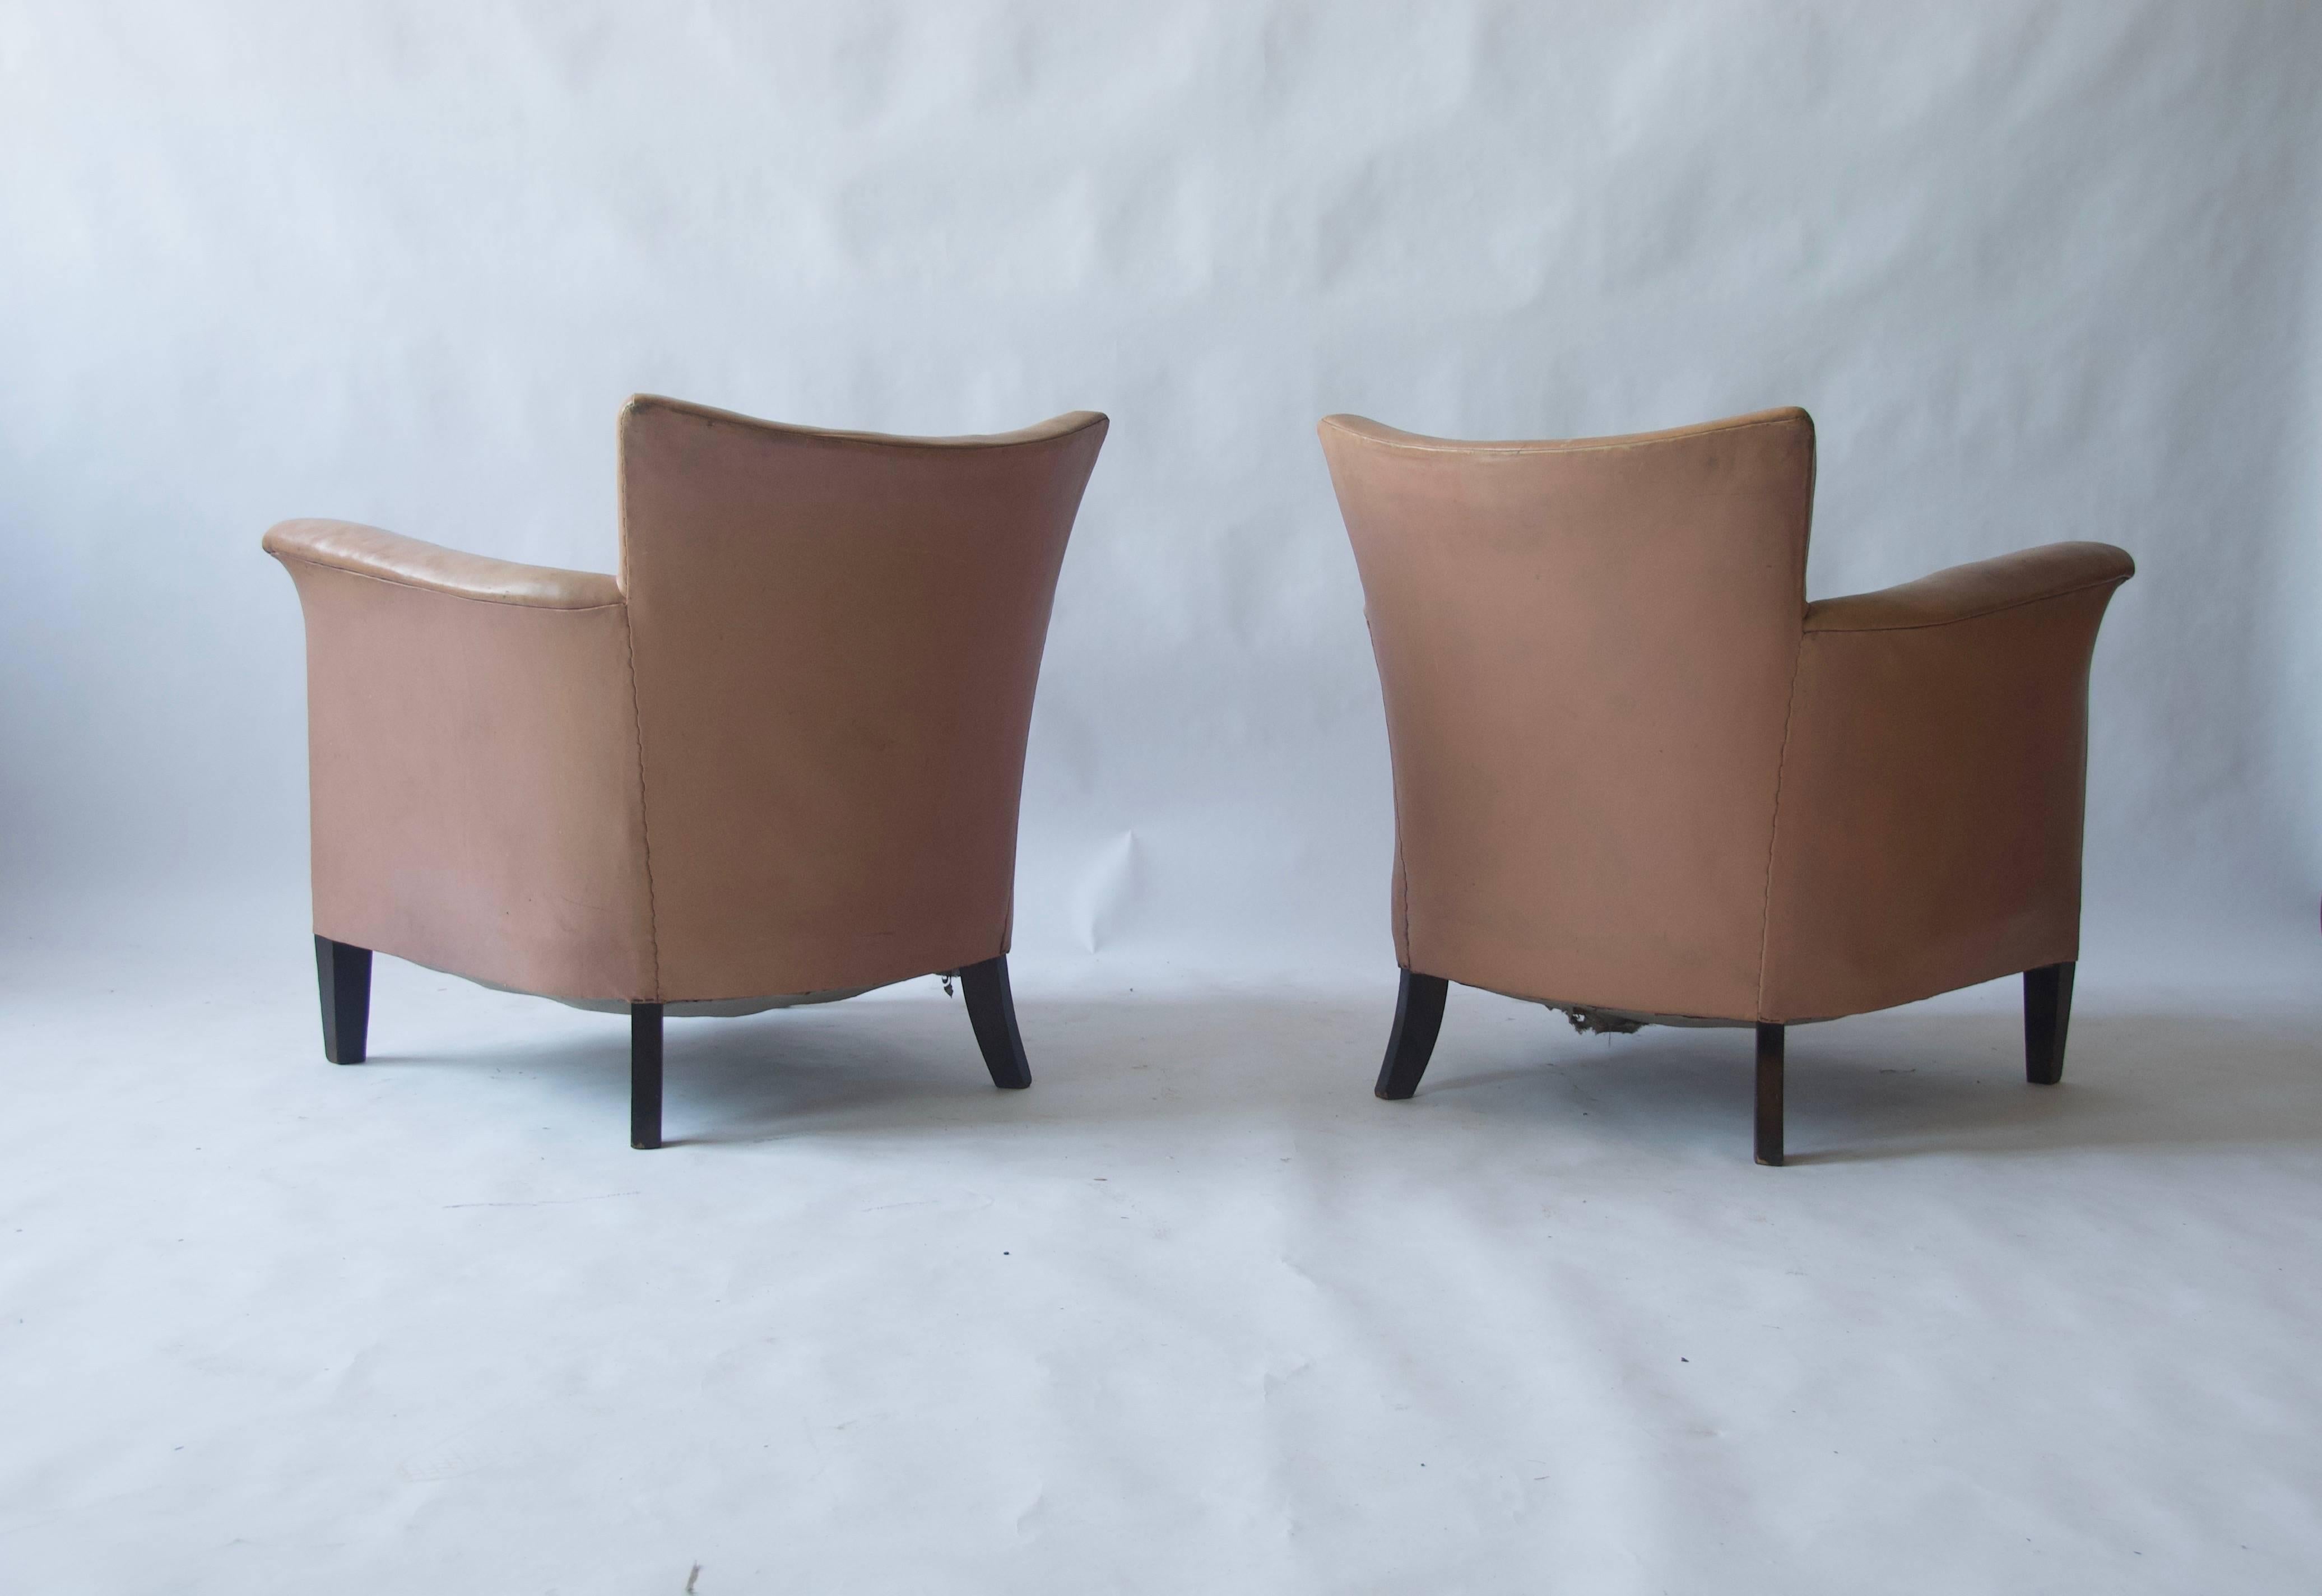 Pair of 1930s Danish Leather Club Chairs In Fair Condition For Sale In Turners Falls, MA